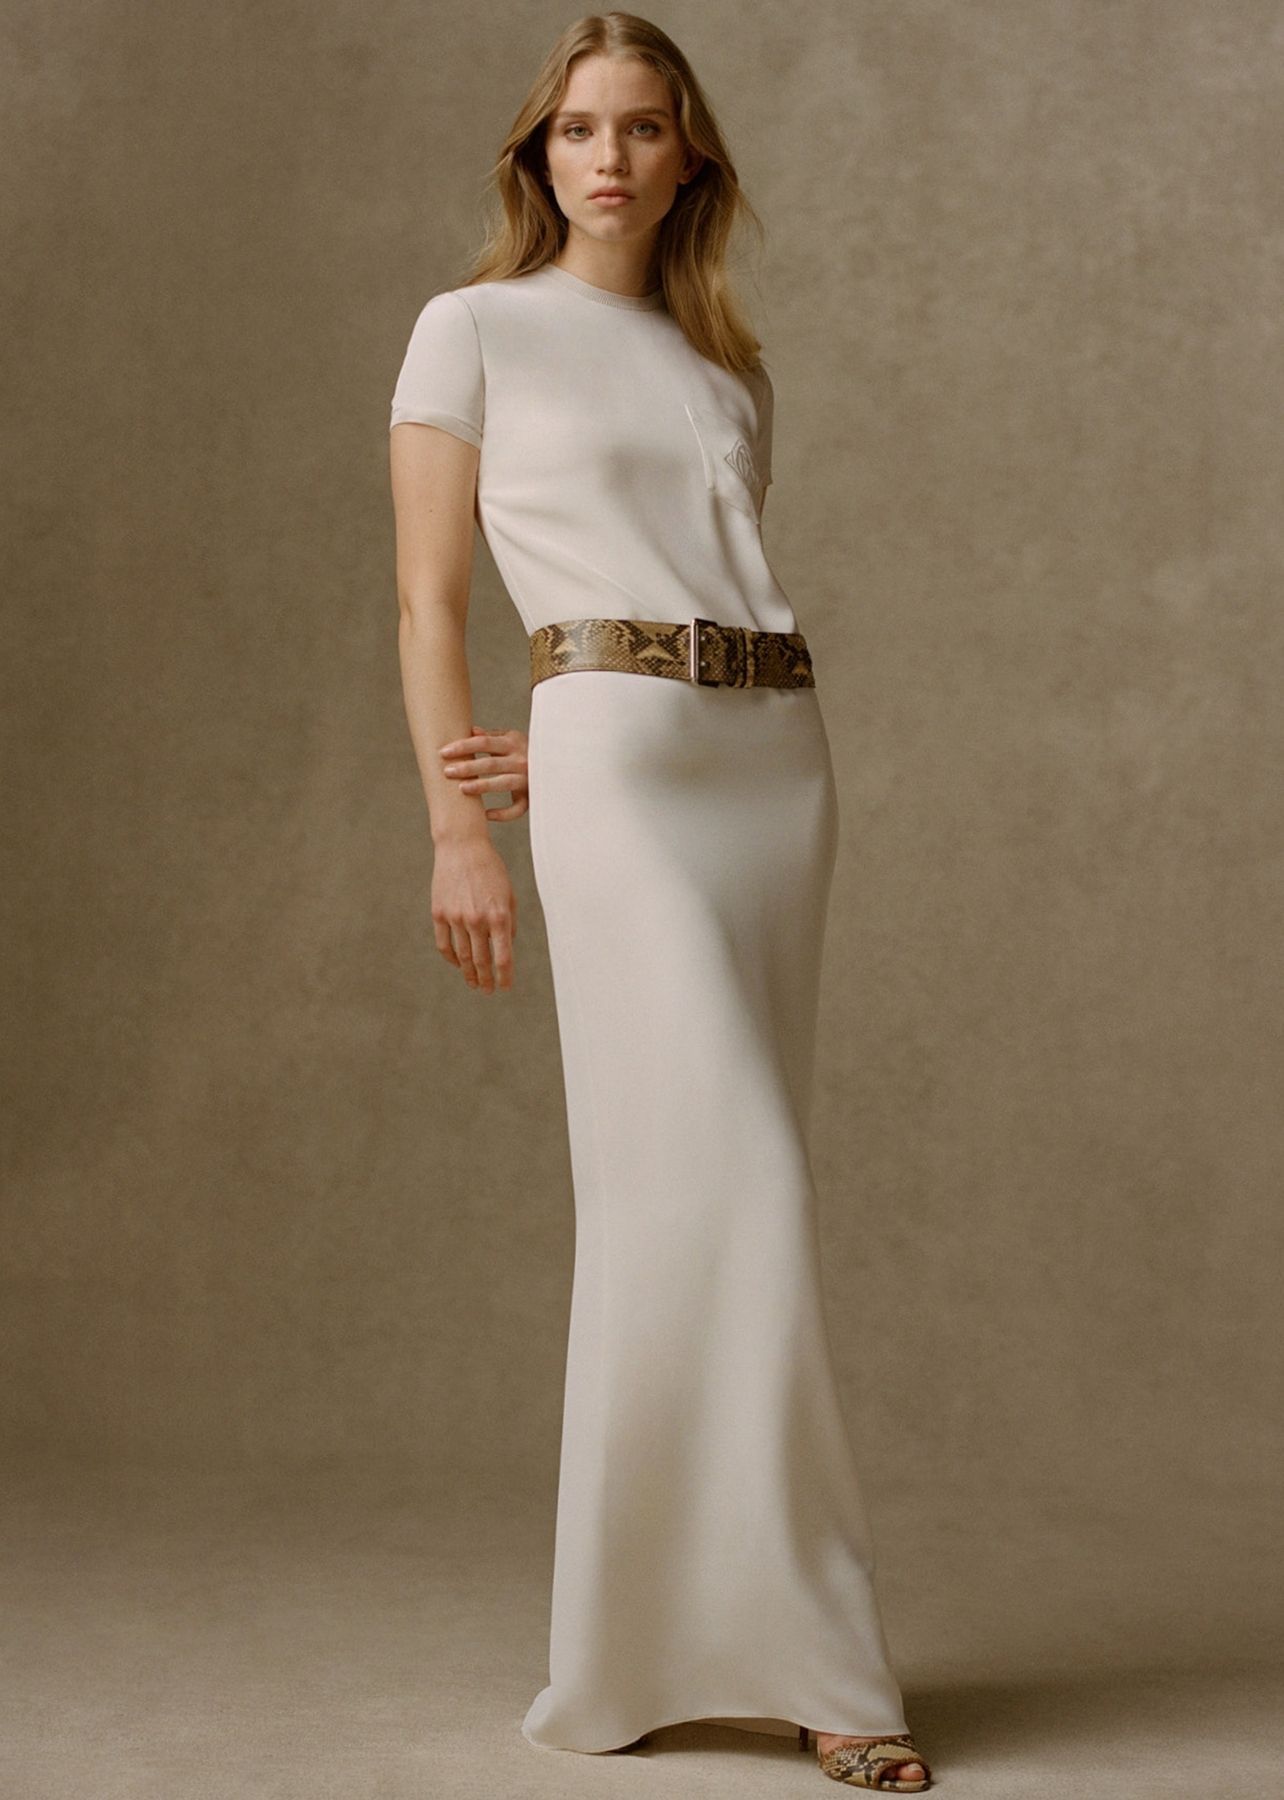 Woman photographed in an ivory floor length dress paired with a snakeskin waist belt and matching sandals